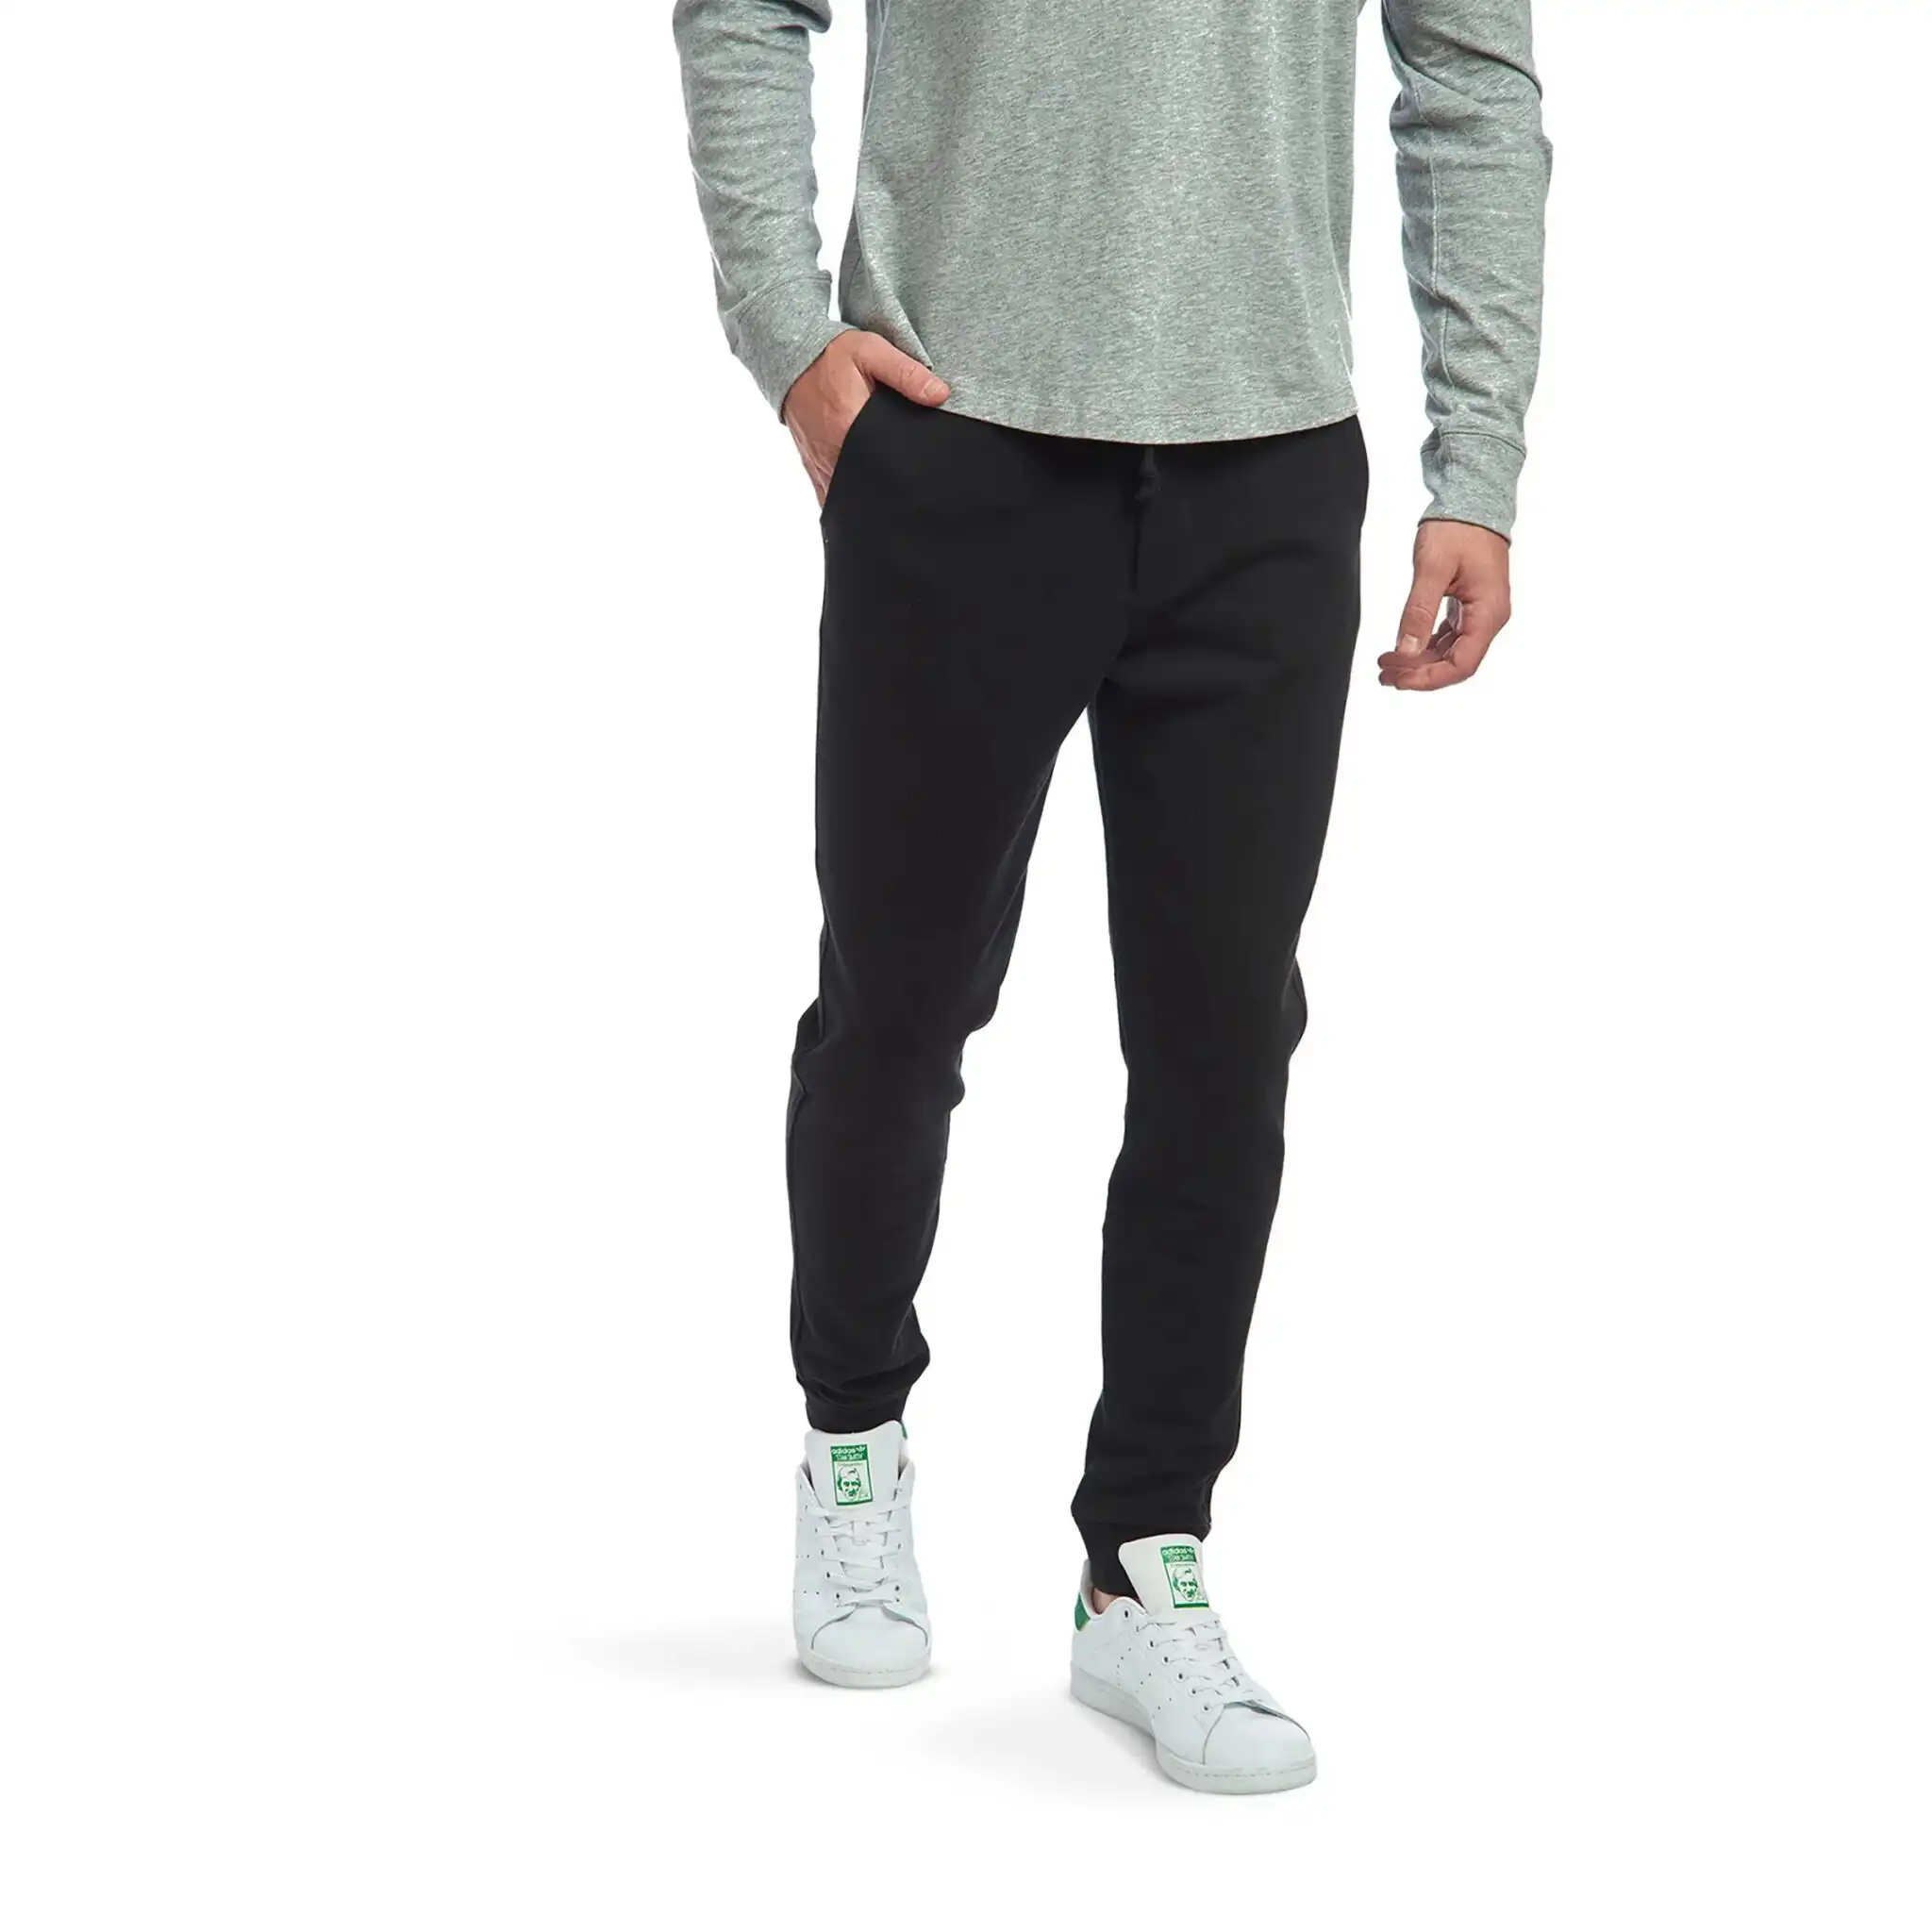 The French Terry Sweatpant Hooper - Mott & Bow